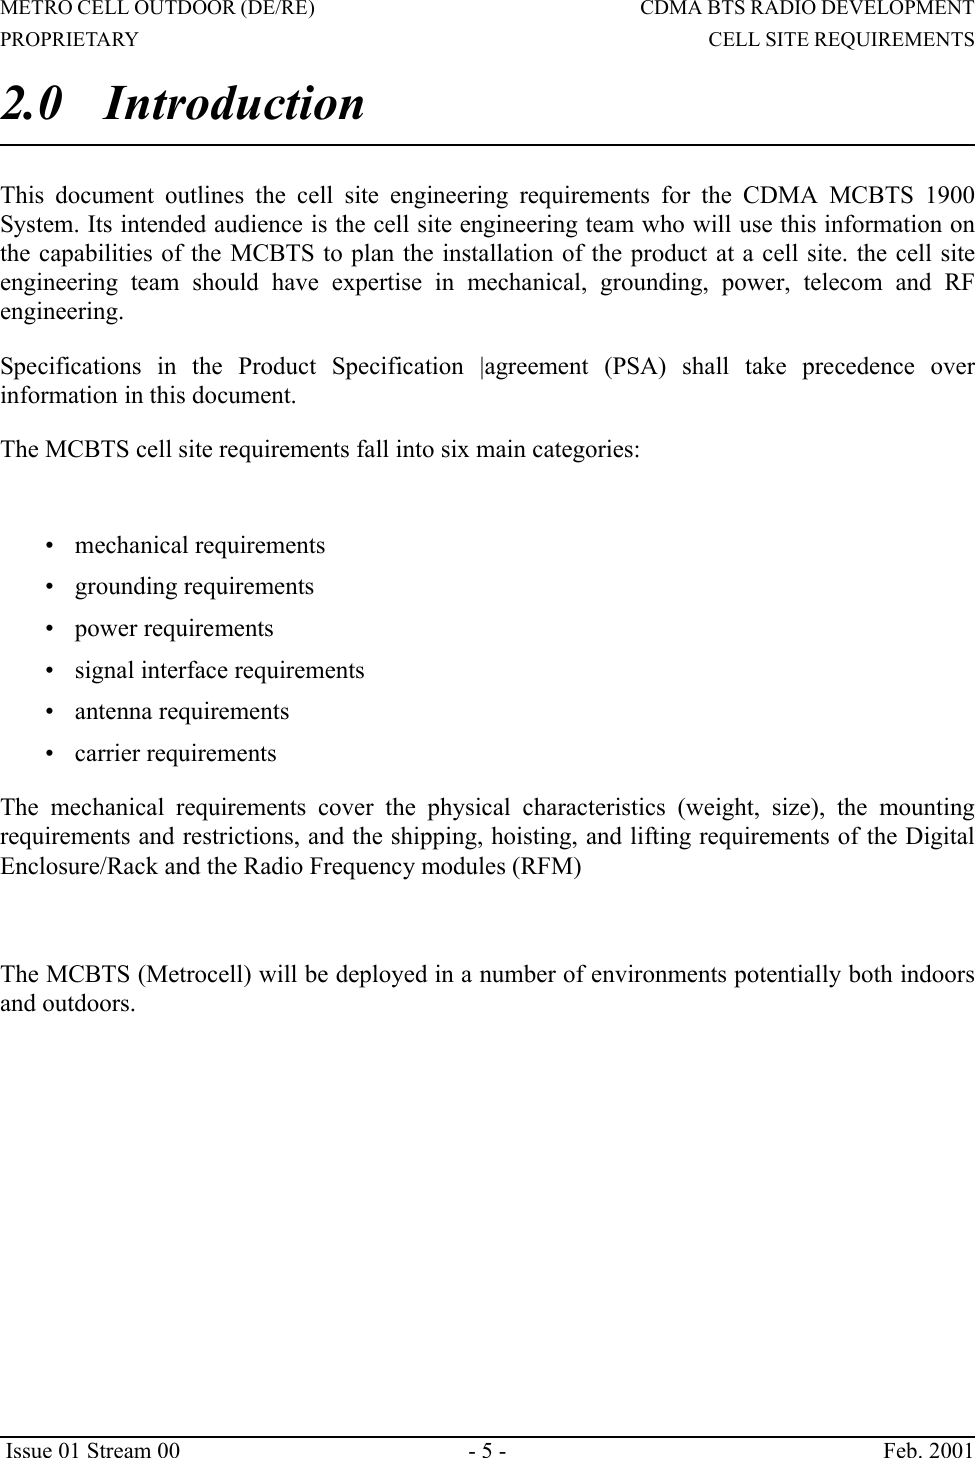 METRO CELL OUTDOOR (DE/RE)                                                                     CDMA BTS RADIO DEVELOPMENTPROPRIETARY                                                                                                                        CELL SITE REQUIREMENTS Issue 01 Stream 00 - 5 - Feb. 20012.0 IntroductionThis document outlines the cell site engineering requirements for the CDMA MCBTS 1900System. Its intended audience is the cell site engineering team who will use this information onthe capabilities of the MCBTS to plan the installation of the product at a cell site. the cell siteengineering team should have expertise in mechanical, grounding, power, telecom and RFengineering.Specifications in the Product Specification |agreement (PSA) shall take precedence overinformation in this document.The MCBTS cell site requirements fall into six main categories:• mechanical requirements• grounding requirements• power requirements• signal interface requirements• antenna requirements• carrier requirementsThe mechanical requirements cover the physical characteristics (weight, size), the mountingrequirements and restrictions, and the shipping, hoisting, and lifting requirements of the DigitalEnclosure/Rack and the Radio Frequency modules (RFM)The MCBTS (Metrocell) will be deployed in a number of environments potentially both indoorsand outdoors.                                           